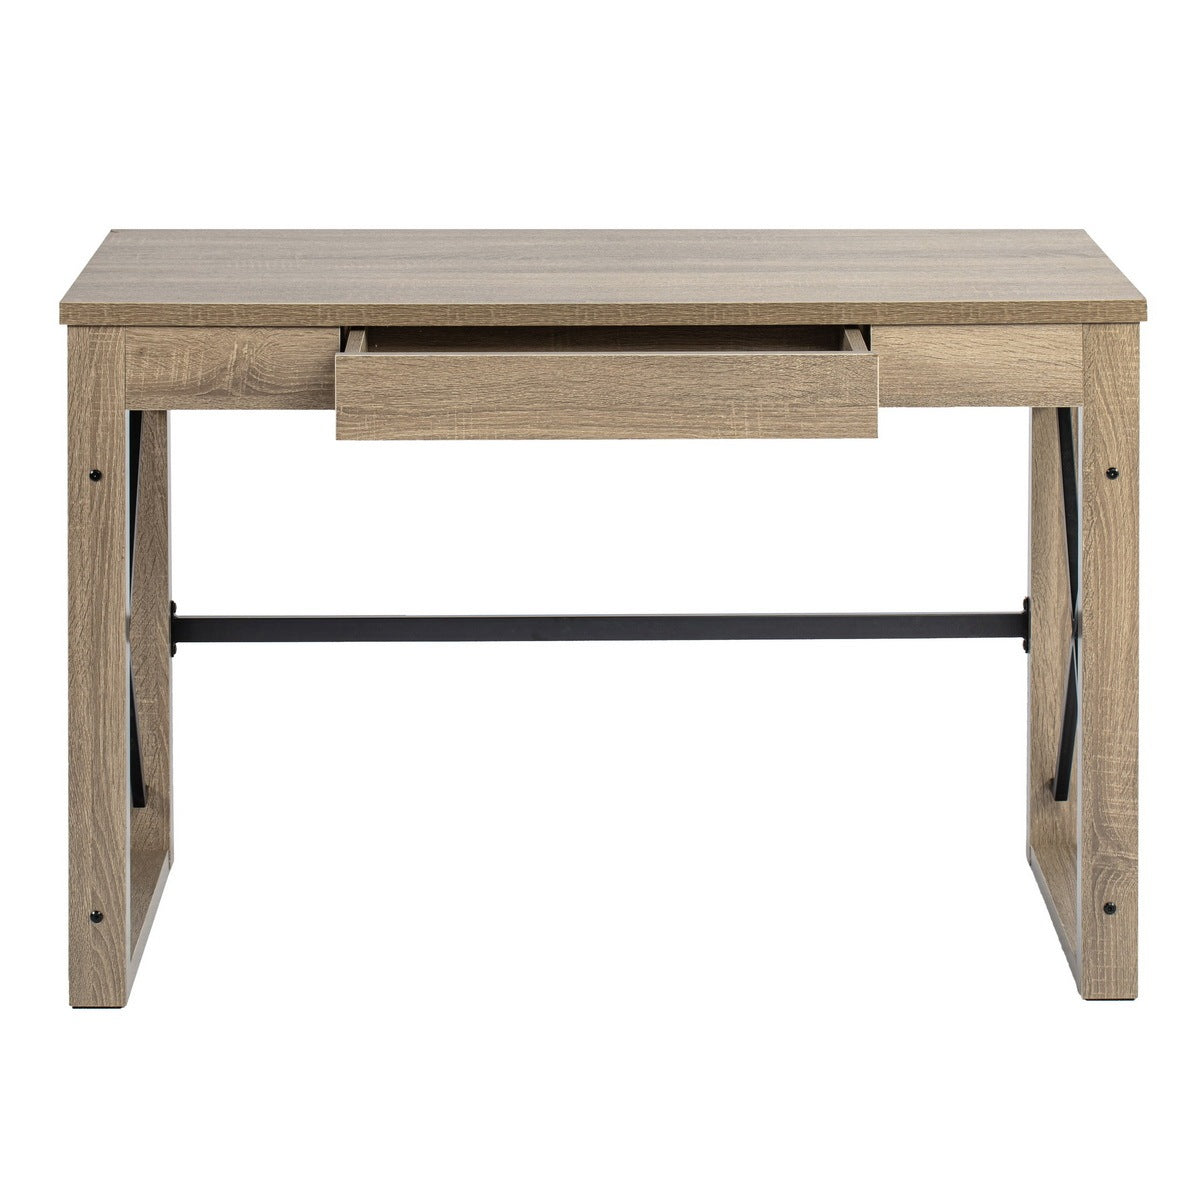 44.1"W x 20.1"D x 30.1"H Industrial Computer Desk With natural wood wash-steel-particle board